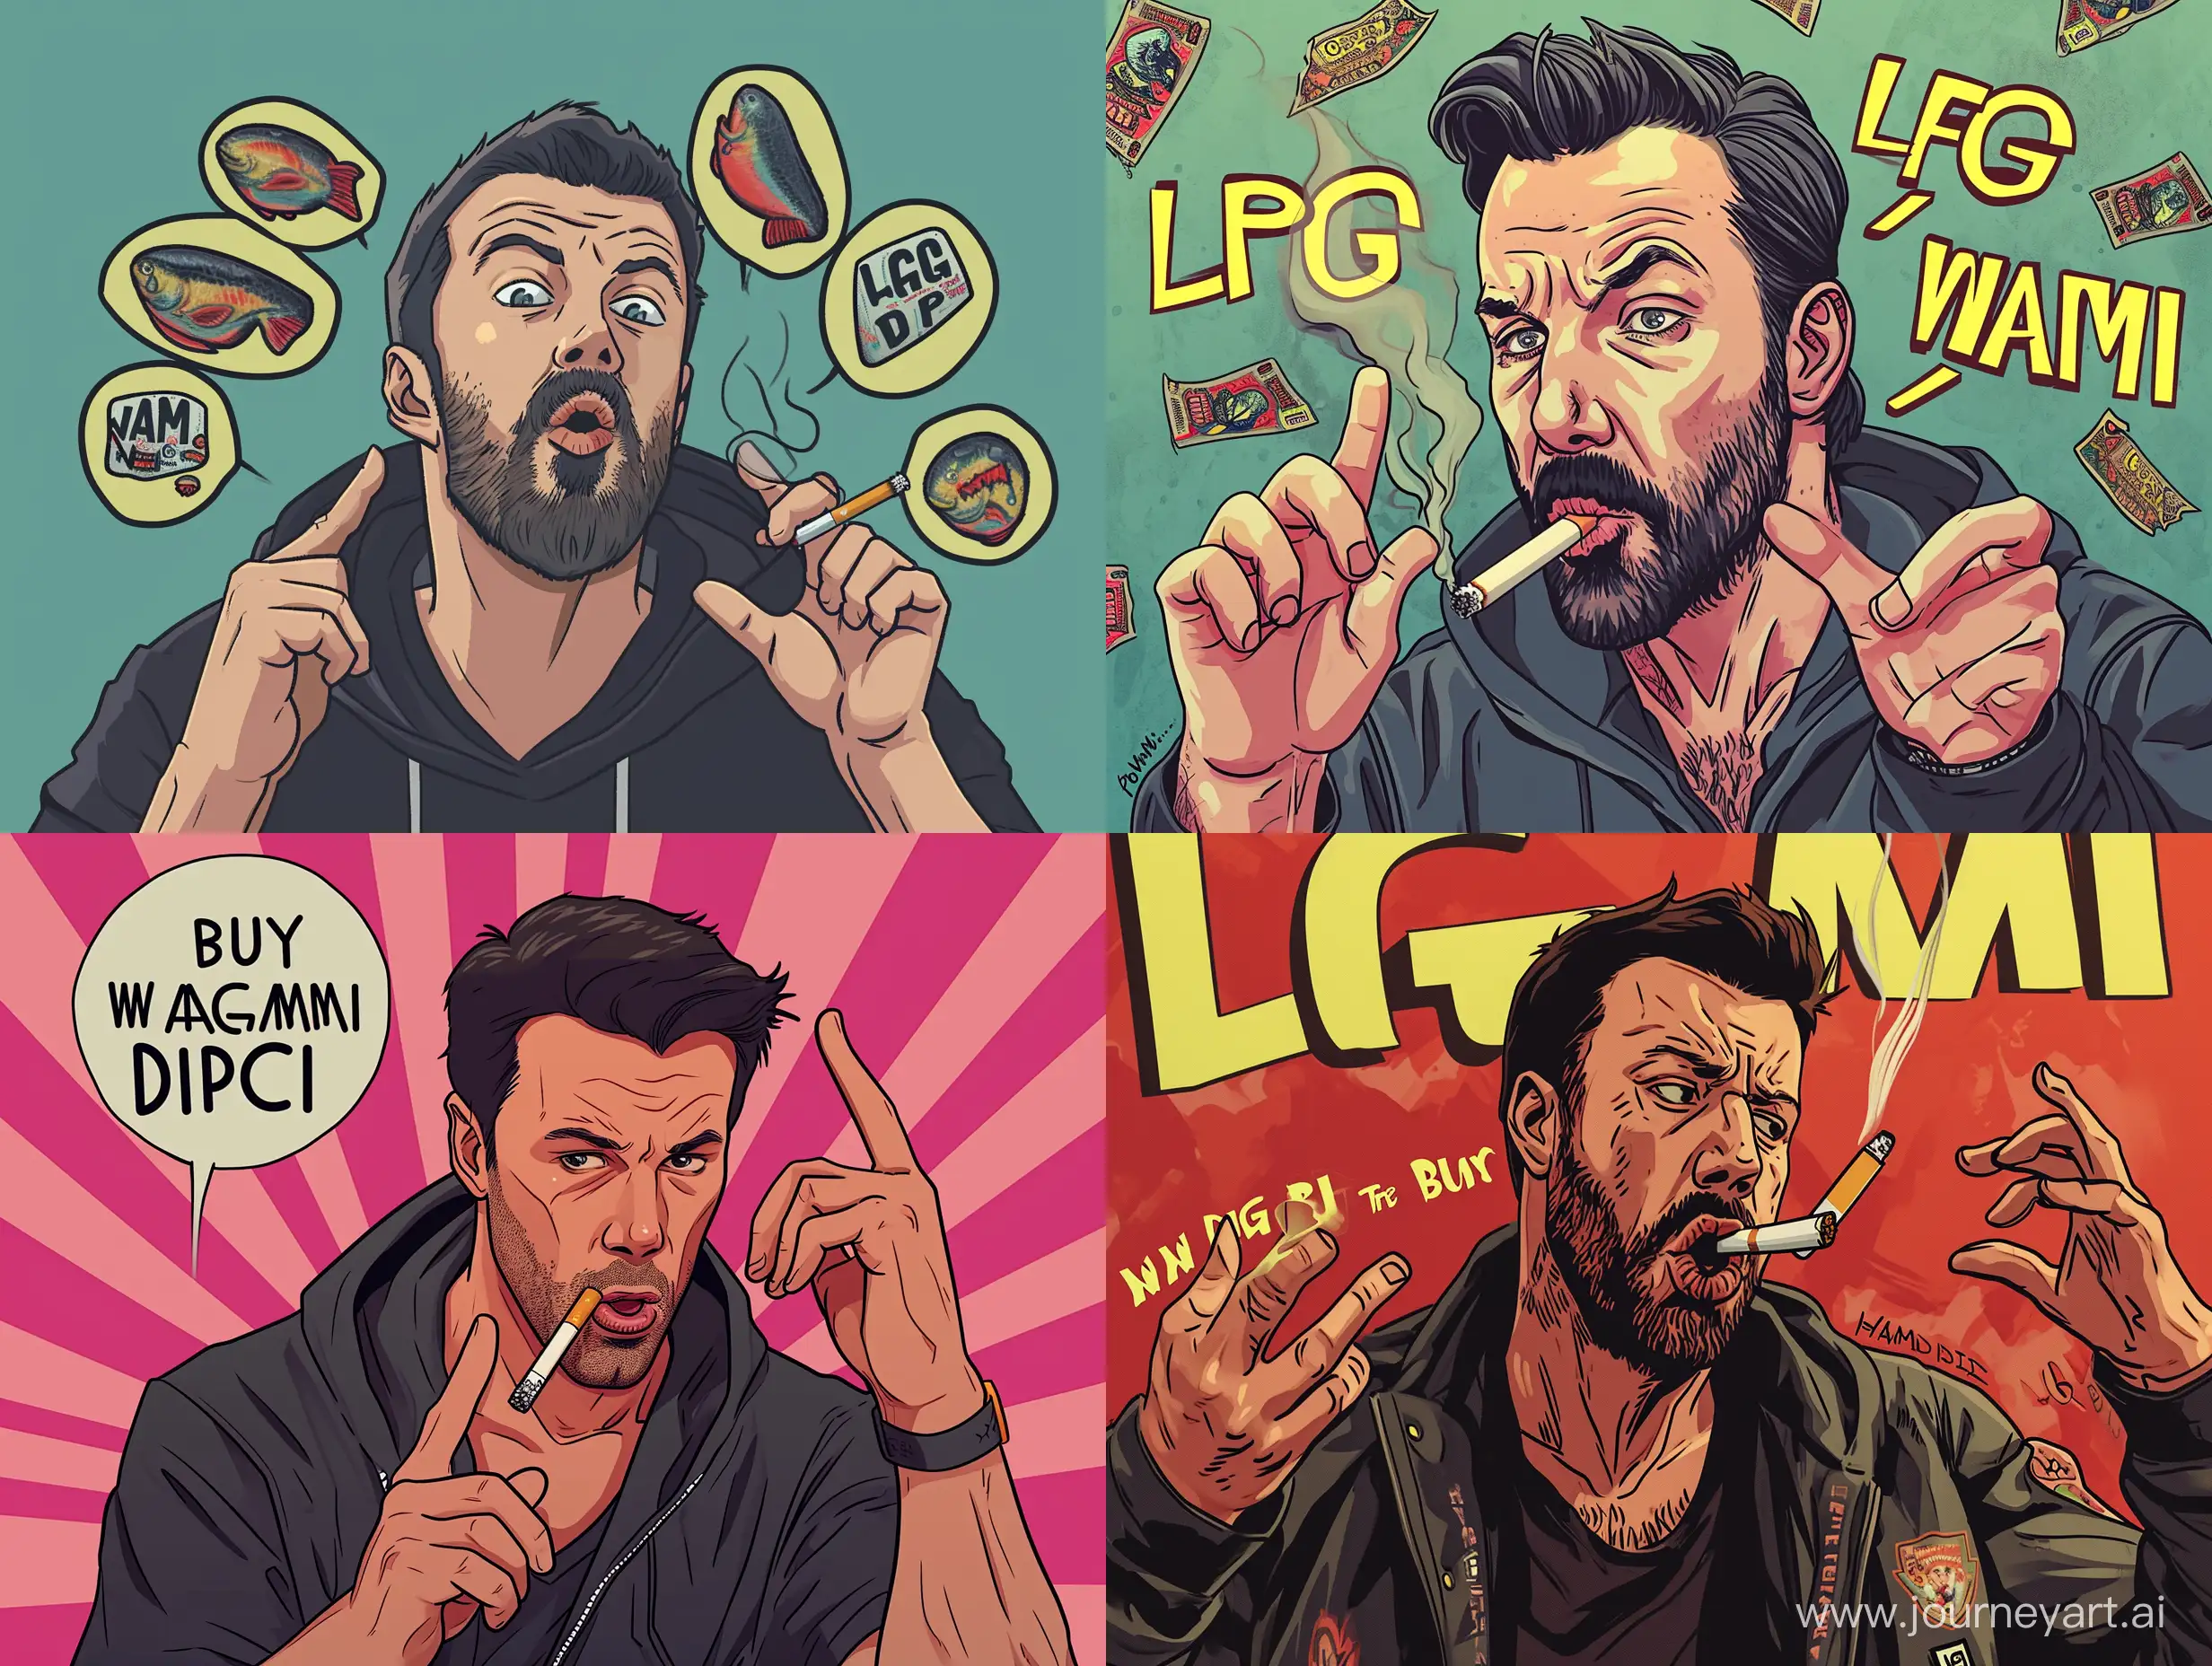  ben affleck saying crypto jargons, with various face and hand expressions, include words like "LFG" "WAGMI" "buy the fucking dip" wiht a cigarette in one hand, in the style of a 90s nickelodeon cartoon